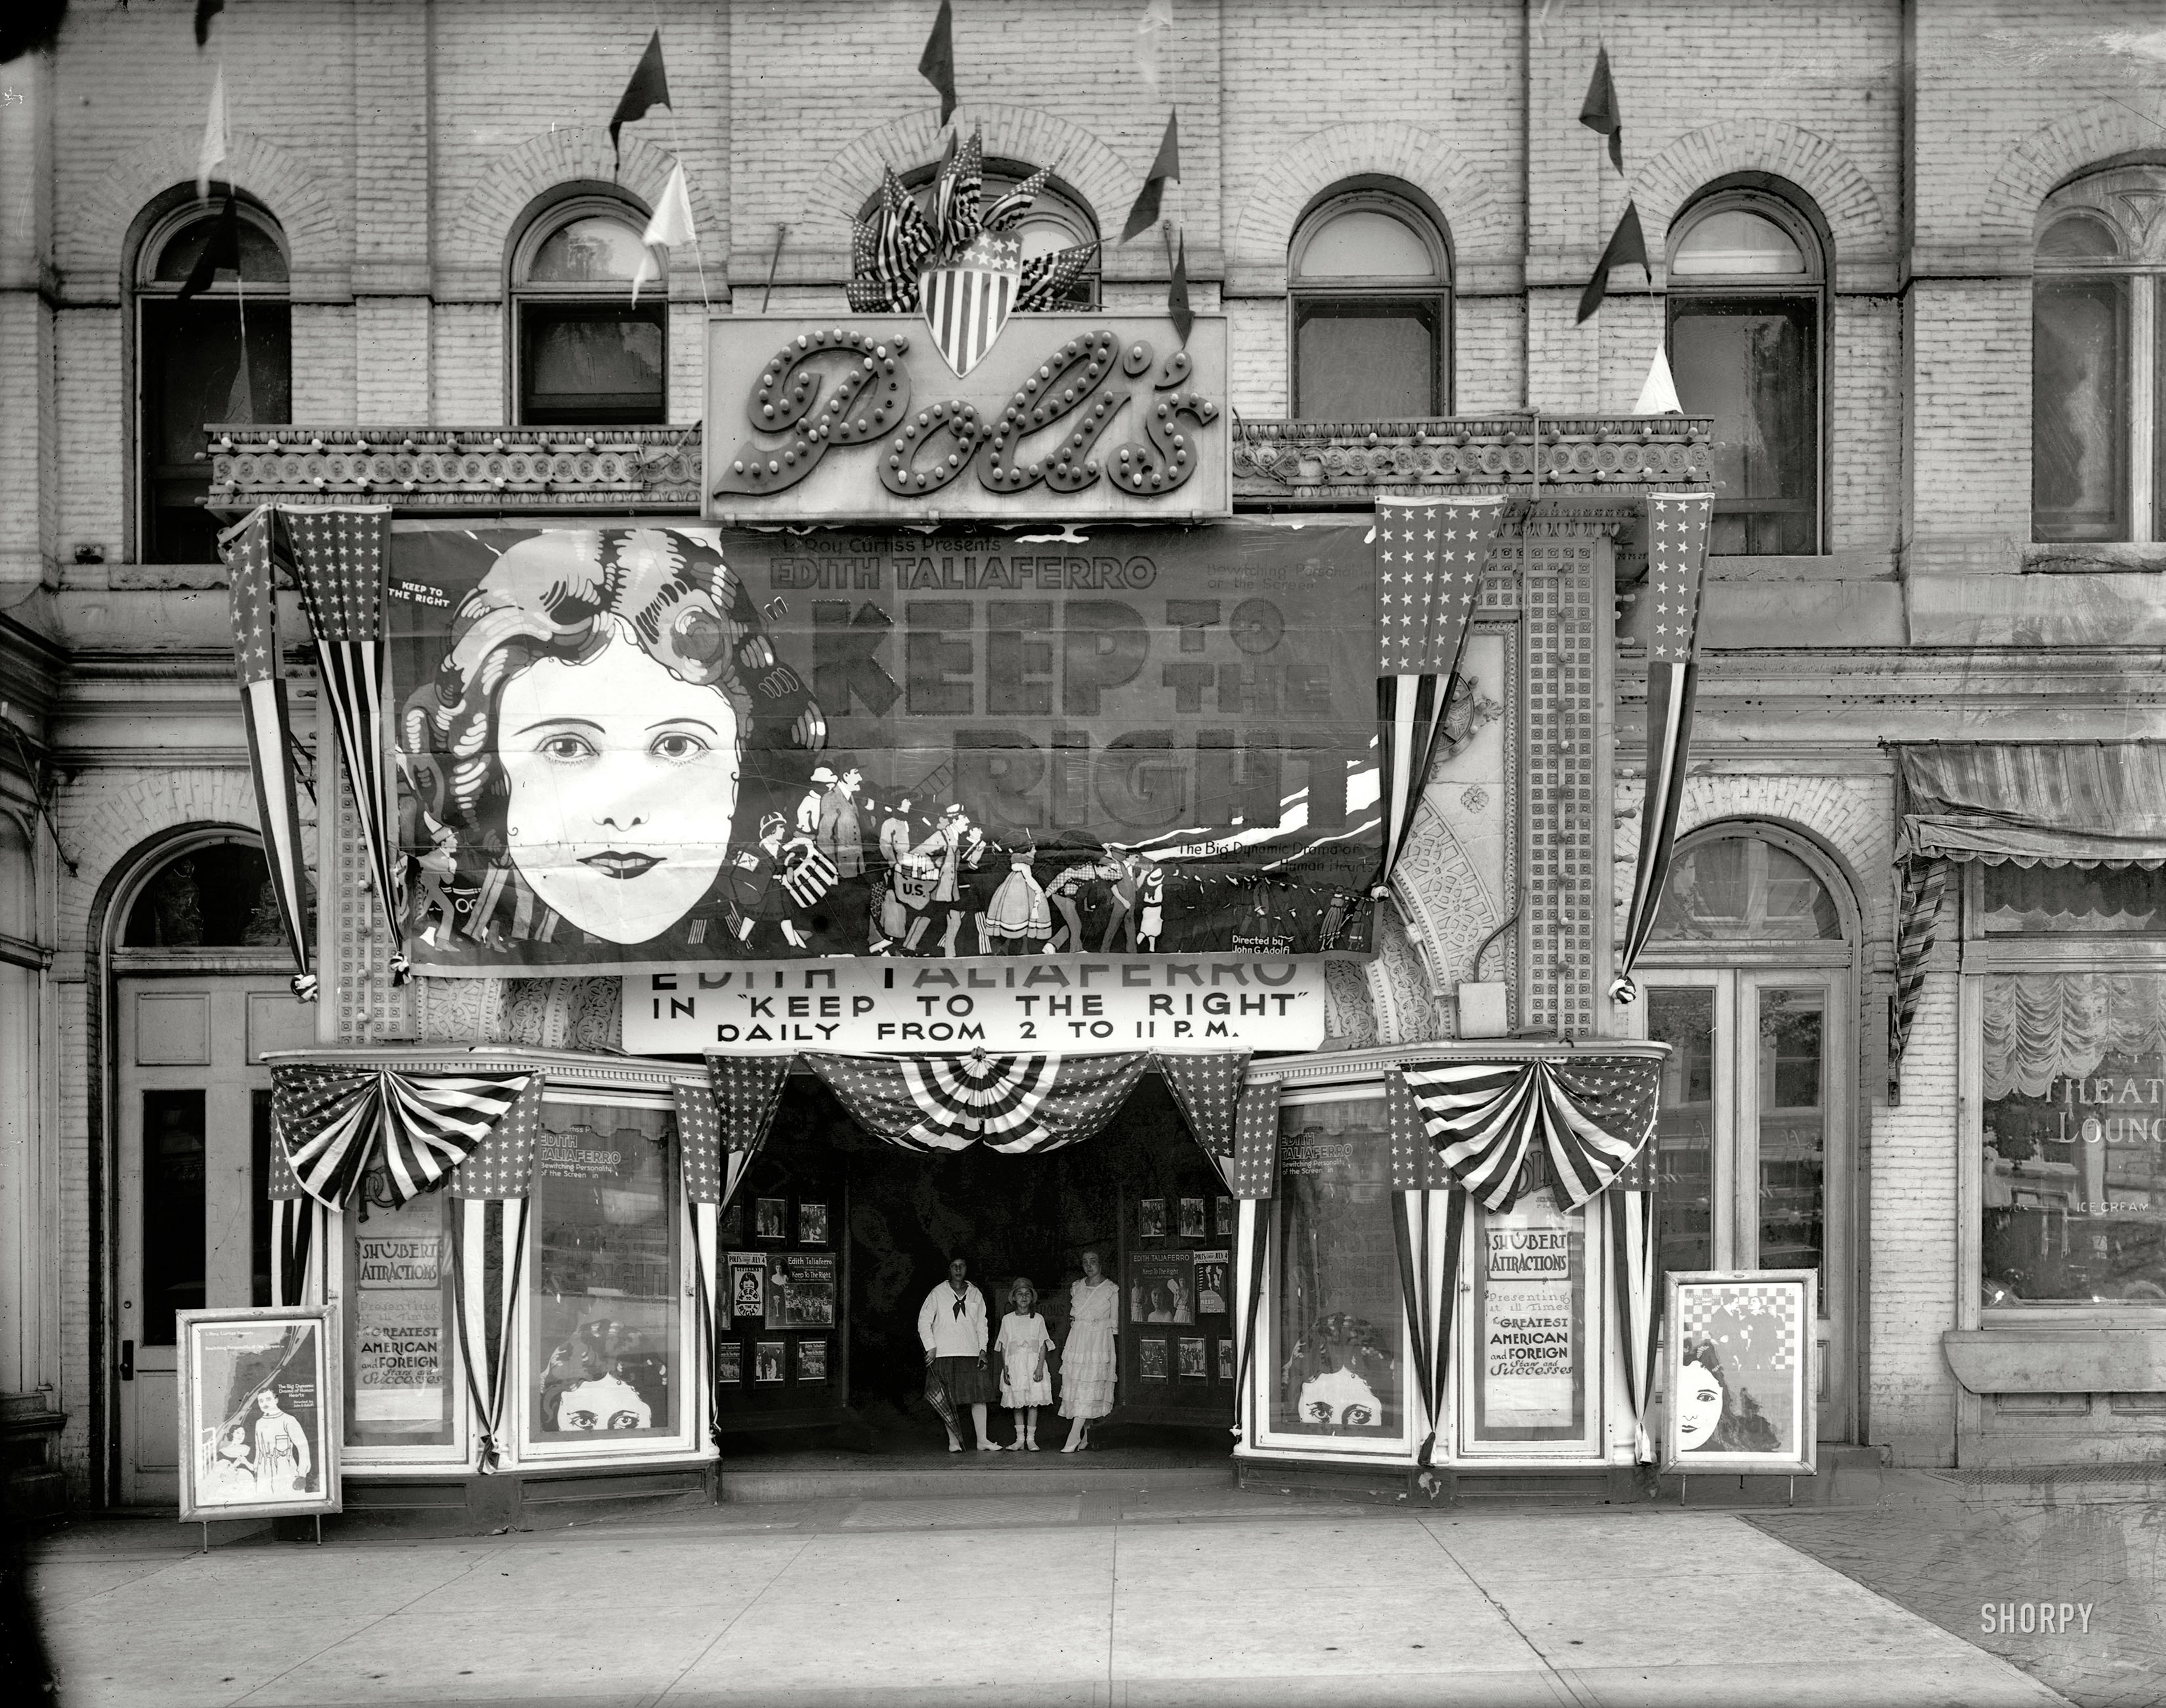 Washington, D.C. July 1920. "Poli's Theater, front." Now playing: Edith Taliaferro in "Keep to the Right," a five-reel silent melodrama about a Jewish girl's search for love -- a film that, in the words of the Washington Post, "is said to solve one of the persistent problems of modern life." National Photo Co. View full size.